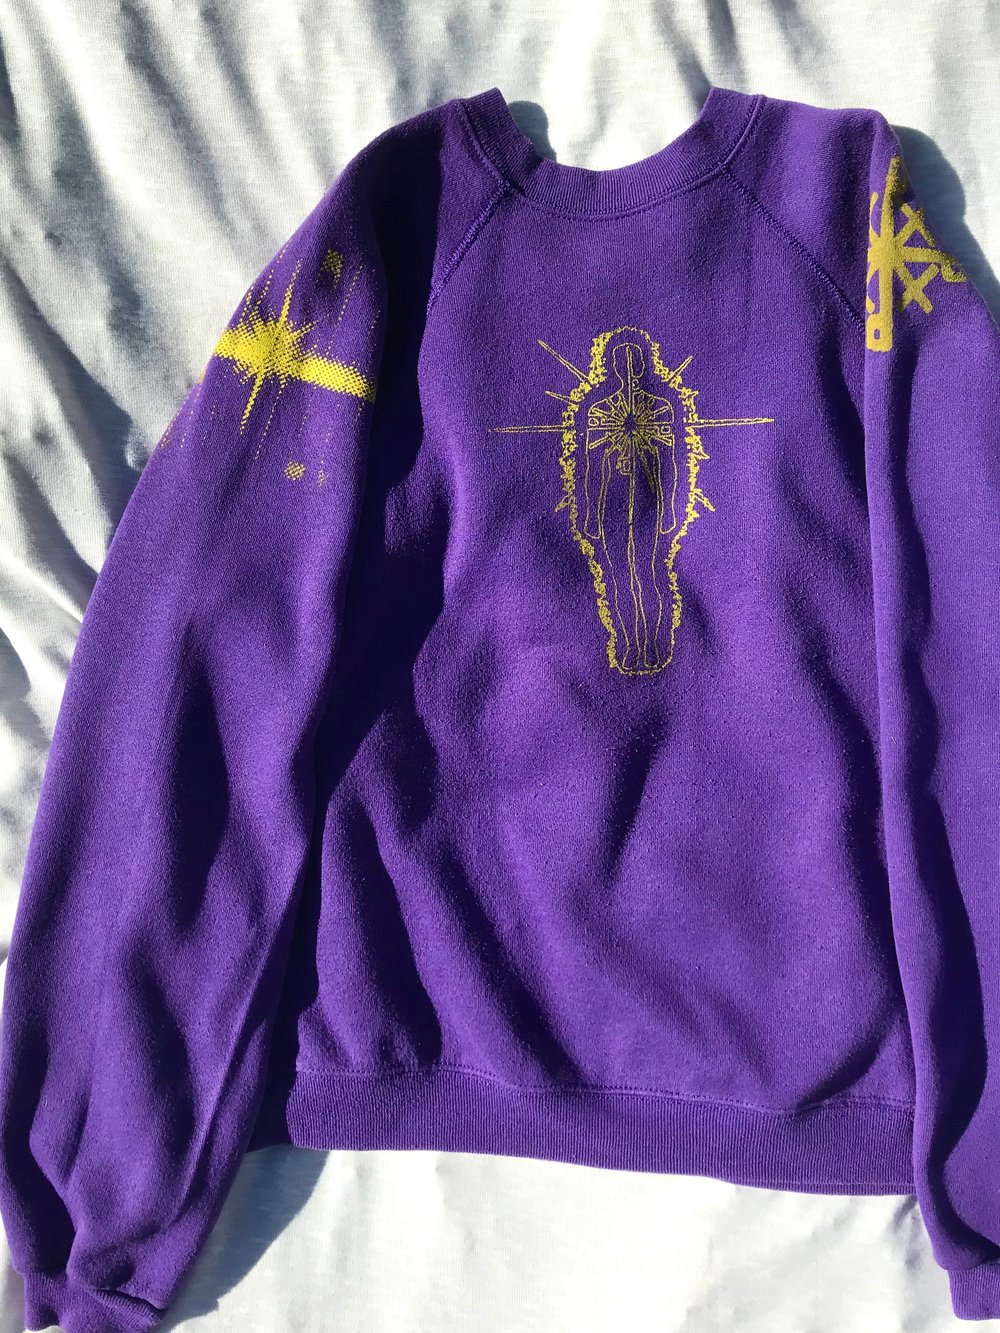 this lil light sweater shirt in purple 